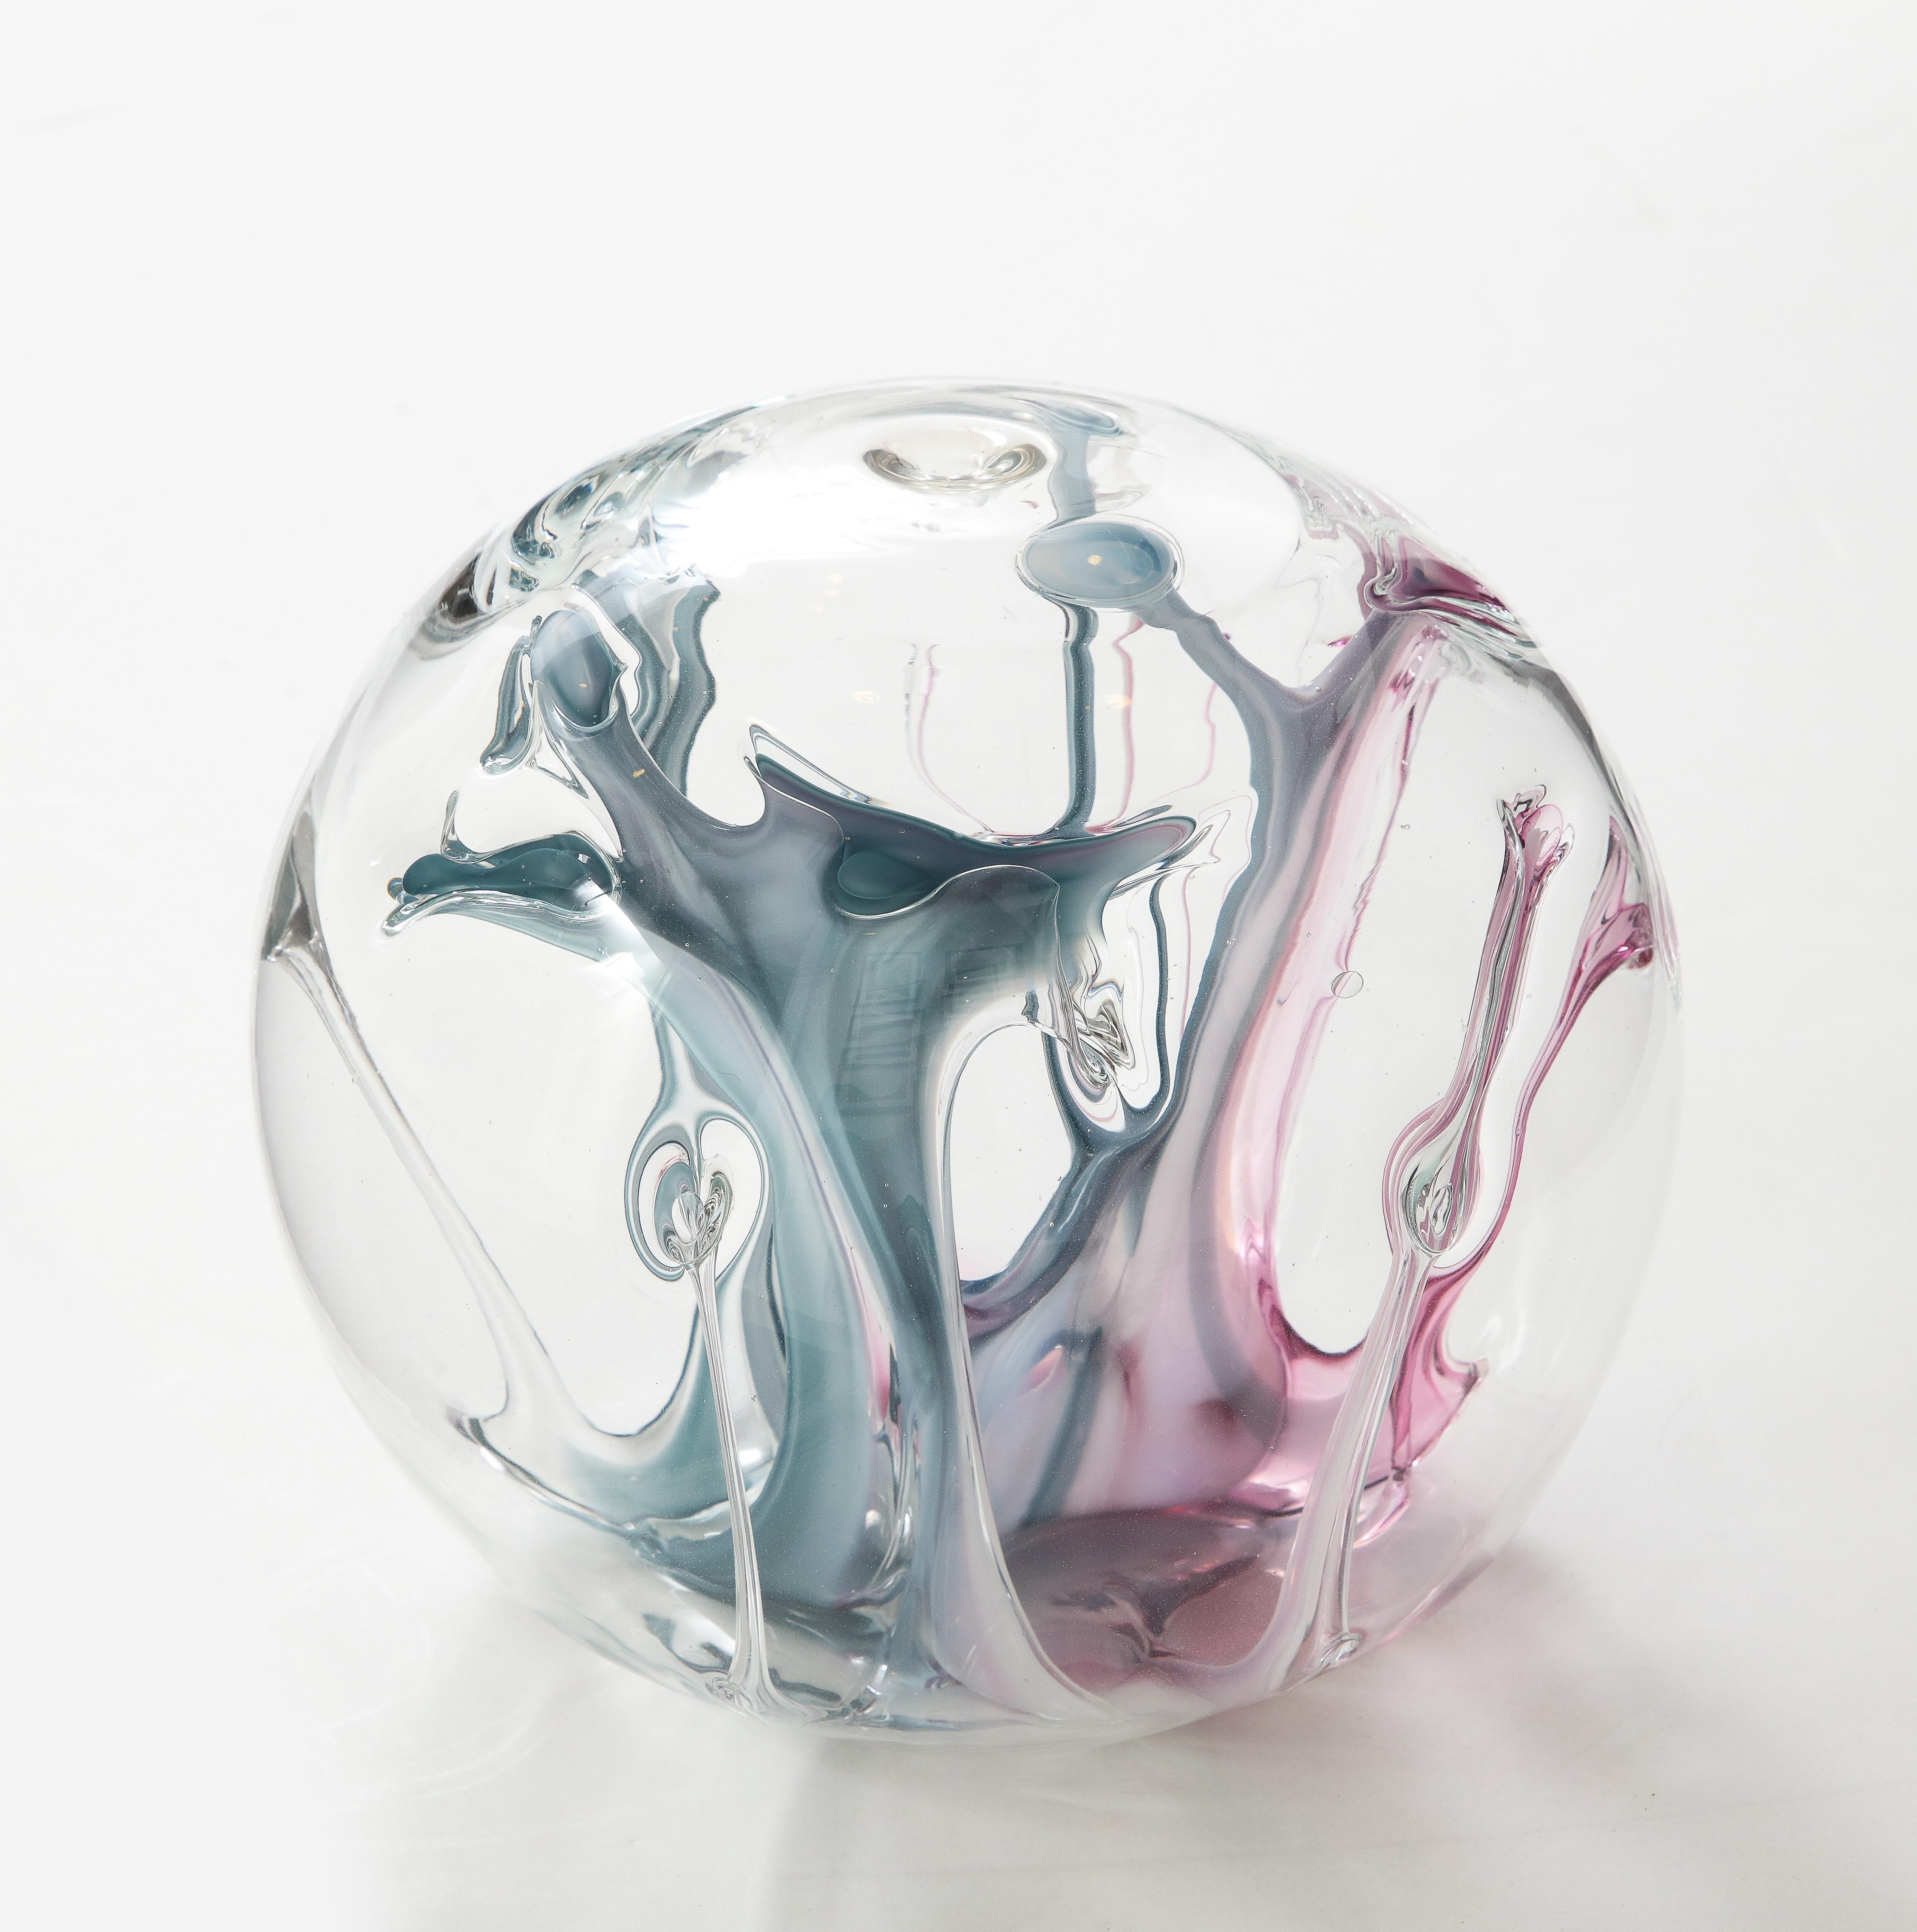 Spectacular mouth blown glass orb sculpture with internal magenta and petrol blue glass threads. Signed on bottom, Peter Bramhall.